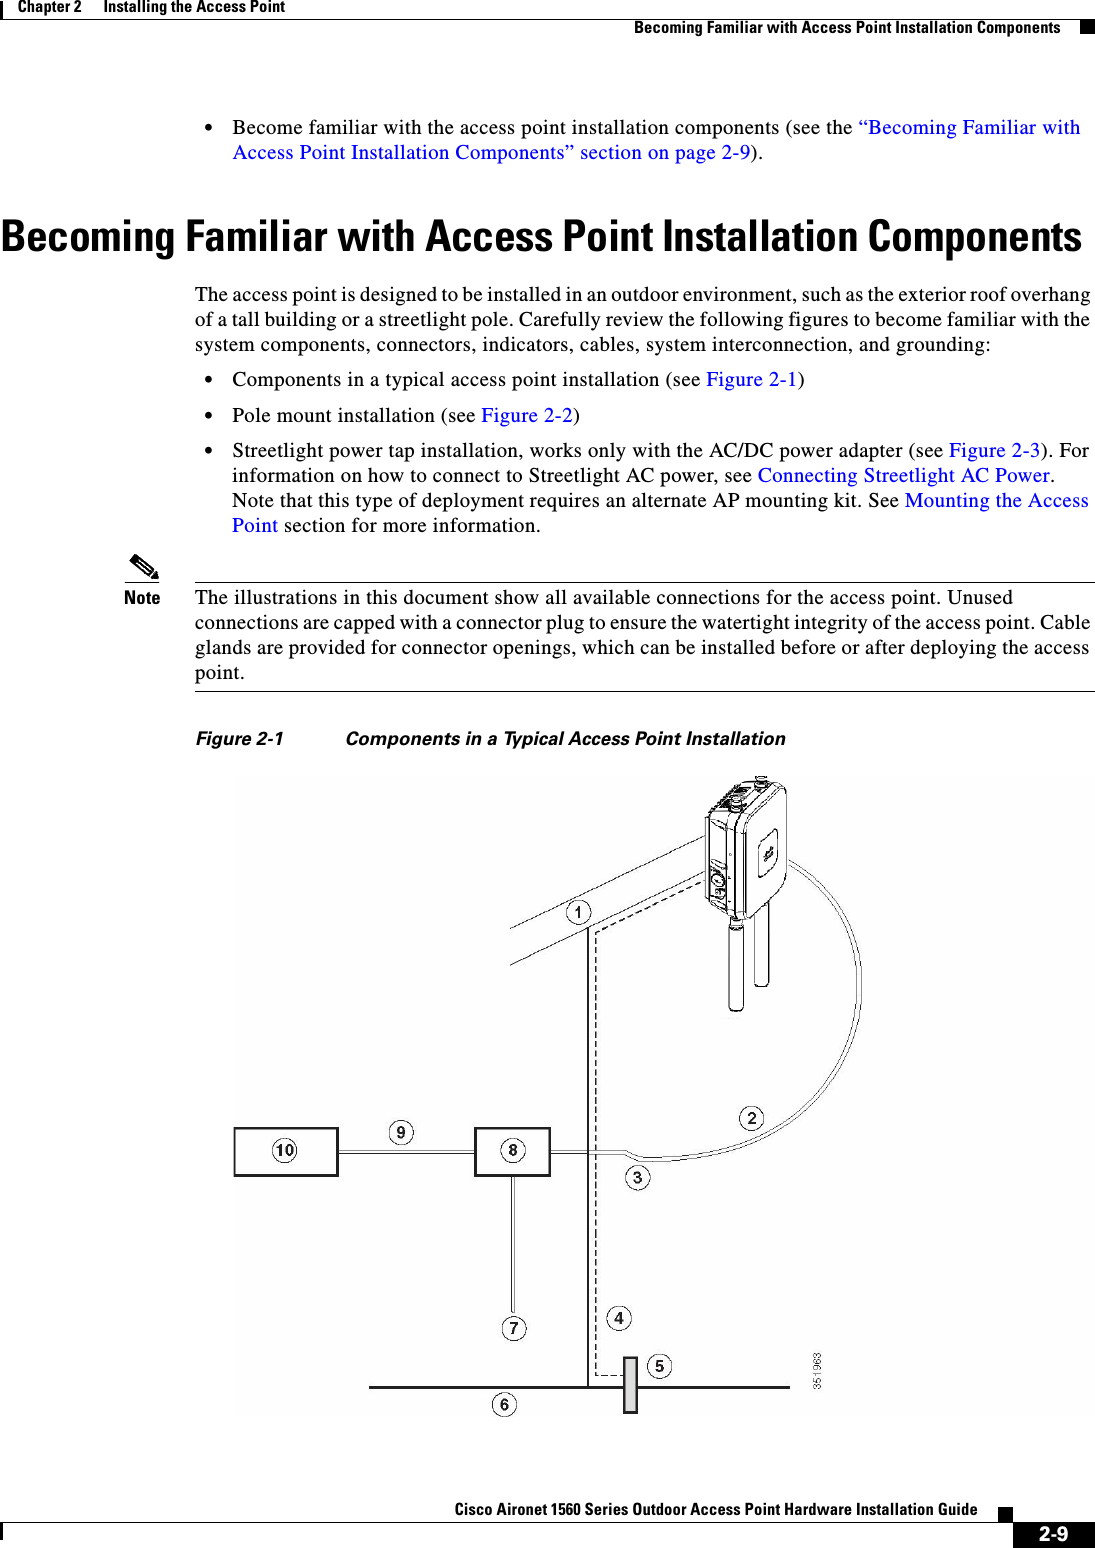  2-9Cisco Aironet 1560 Series Outdoor Access Point Hardware Installation Guide Chapter 2      Installing the Access PointBecoming Familiar with Access Point Installation Components•Become familiar with the access point installation components (see the “Becoming Familiar with Access Point Installation Components” section on page 2-9).Becoming Familiar with Access Point Installation ComponentsThe access point is designed to be installed in an outdoor environment, such as the exterior roof overhang of a tall building or a streetlight pole. Carefully review the following figures to become familiar with the system components, connectors, indicators, cables, system interconnection, and grounding:•Components in a typical access point installation (see Figure 2-1)•Pole mount installation (see Figure 2-2)•Streetlight power tap installation, works only with the AC/DC power adapter (see Figure 2-3). For information on how to connect to Streetlight AC power, see Connecting Streetlight AC Power.Note that this type of deployment requires an alternate AP mounting kit. See Mounting the Access Point section for more information.Note The illustrations in this document show all available connections for the access point. Unused connections are capped with a connector plug to ensure the watertight integrity of the access point. Cable glands are provided for connector openings, which can be installed before or after deploying the access point. Figure 2-1 Components in a Typical Access Point Installation